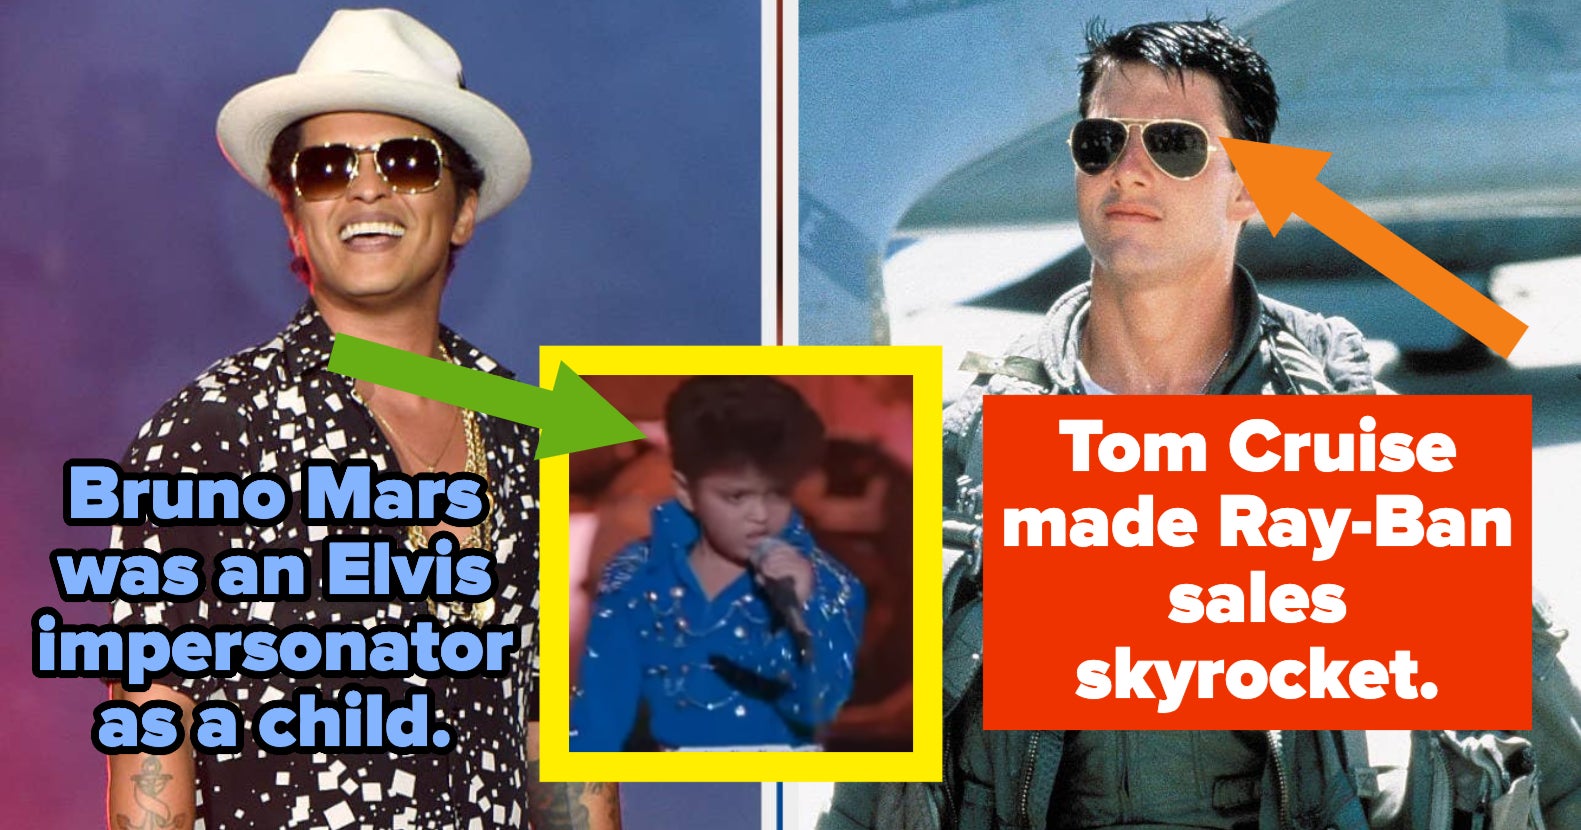 21 Shocking, Surprising, And Downright Unforgettable Facts I Learned This Week